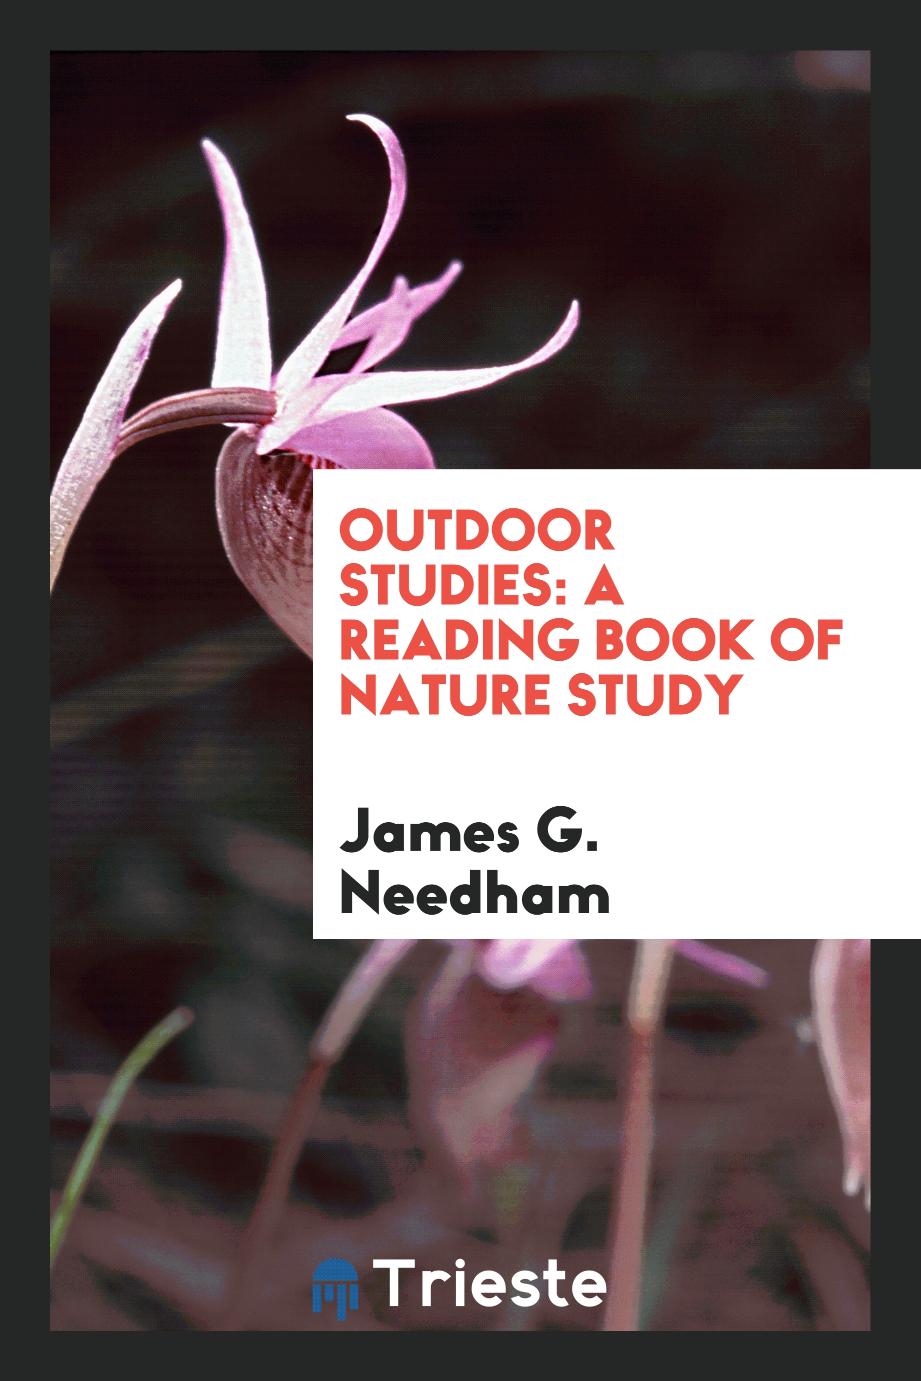 Outdoor Studies: A Reading Book of Nature Study